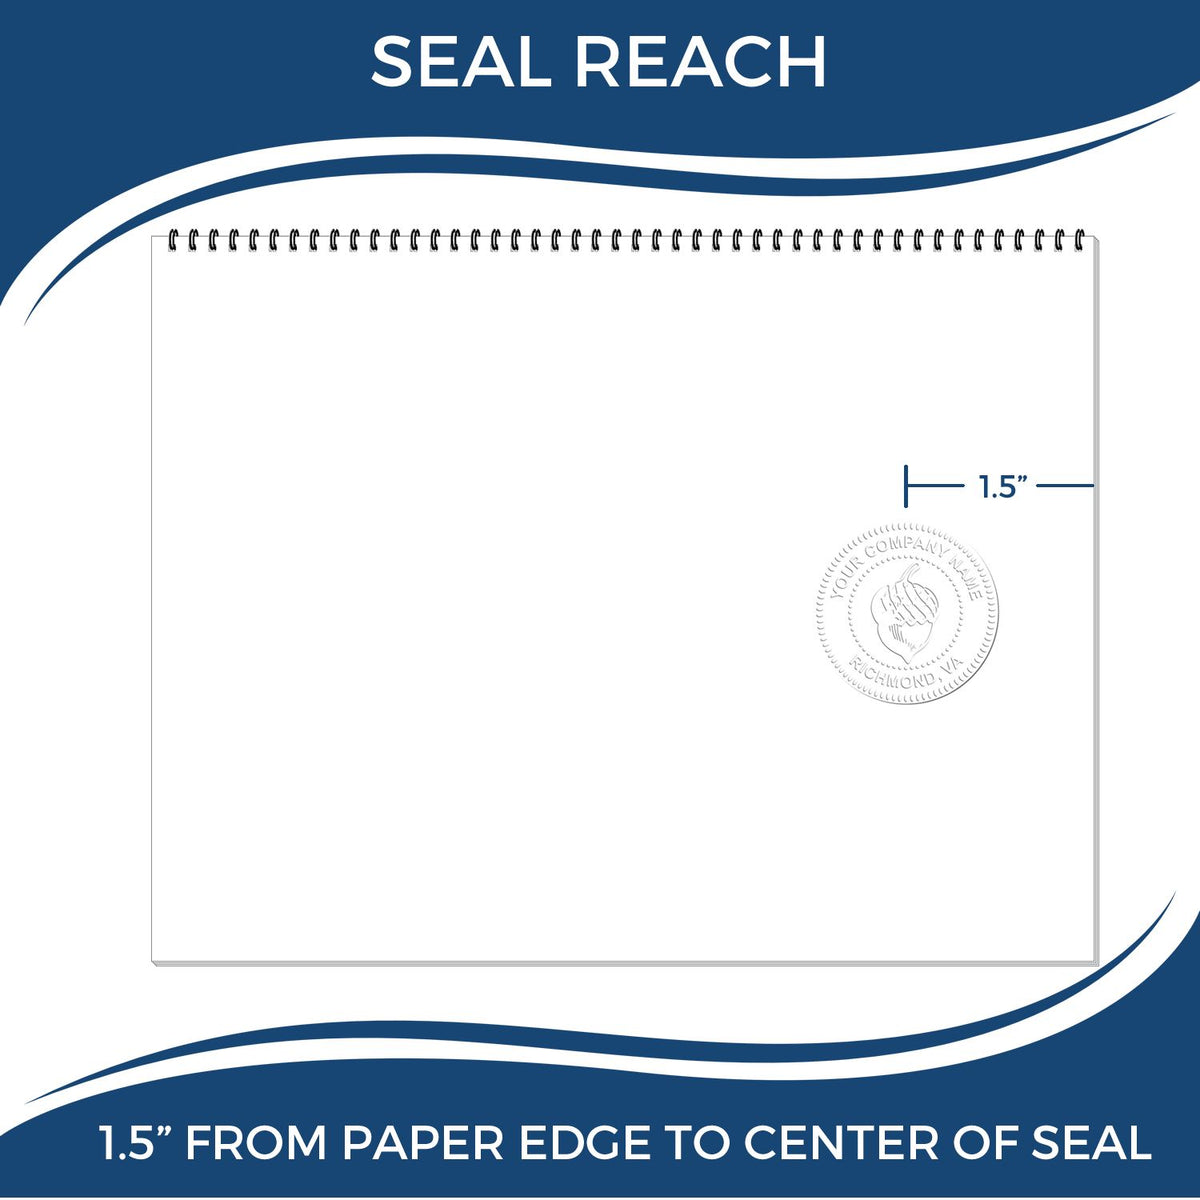 An infographic showing the seal reach which is represented by a ruler and a miniature seal image of the Hybrid Washington Architect Seal